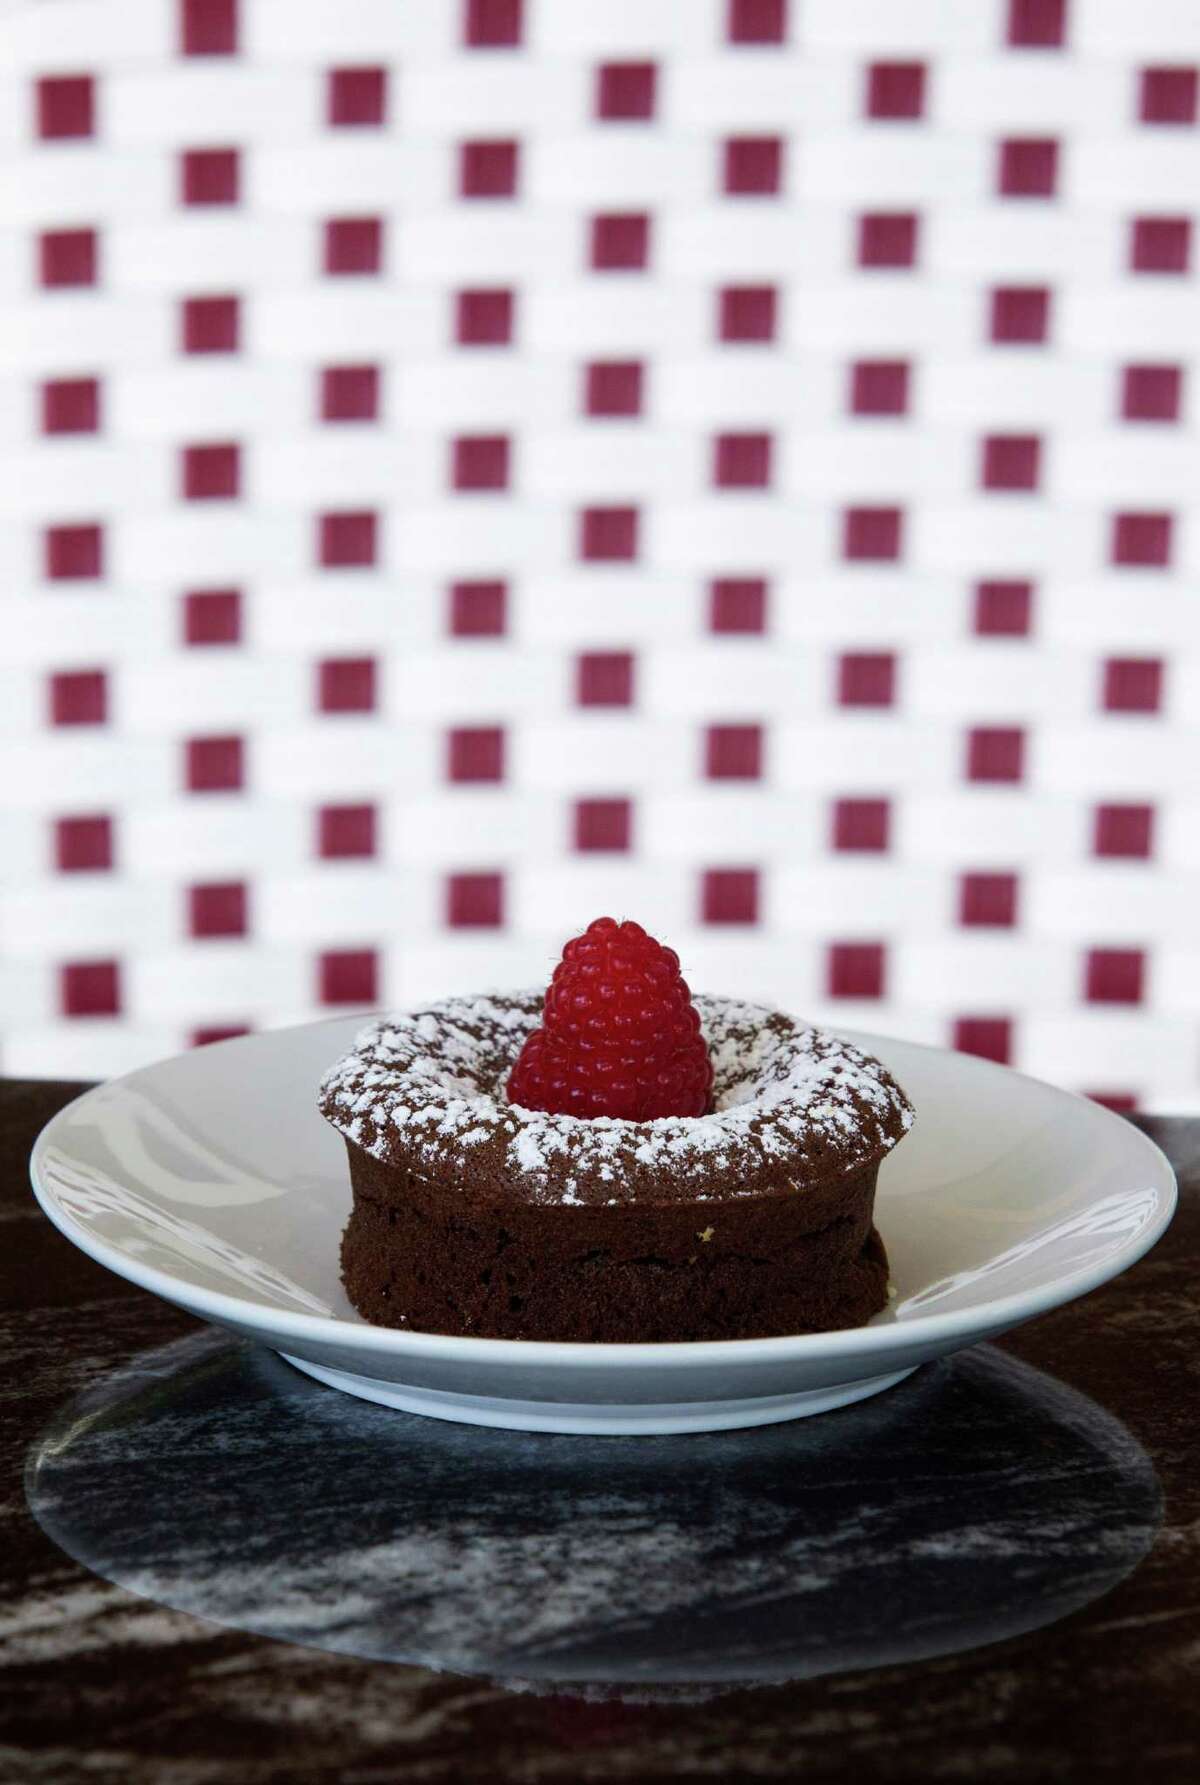 Fondant au chocolat delivers an intense chocolate flavor that deserves to be savored slowly.